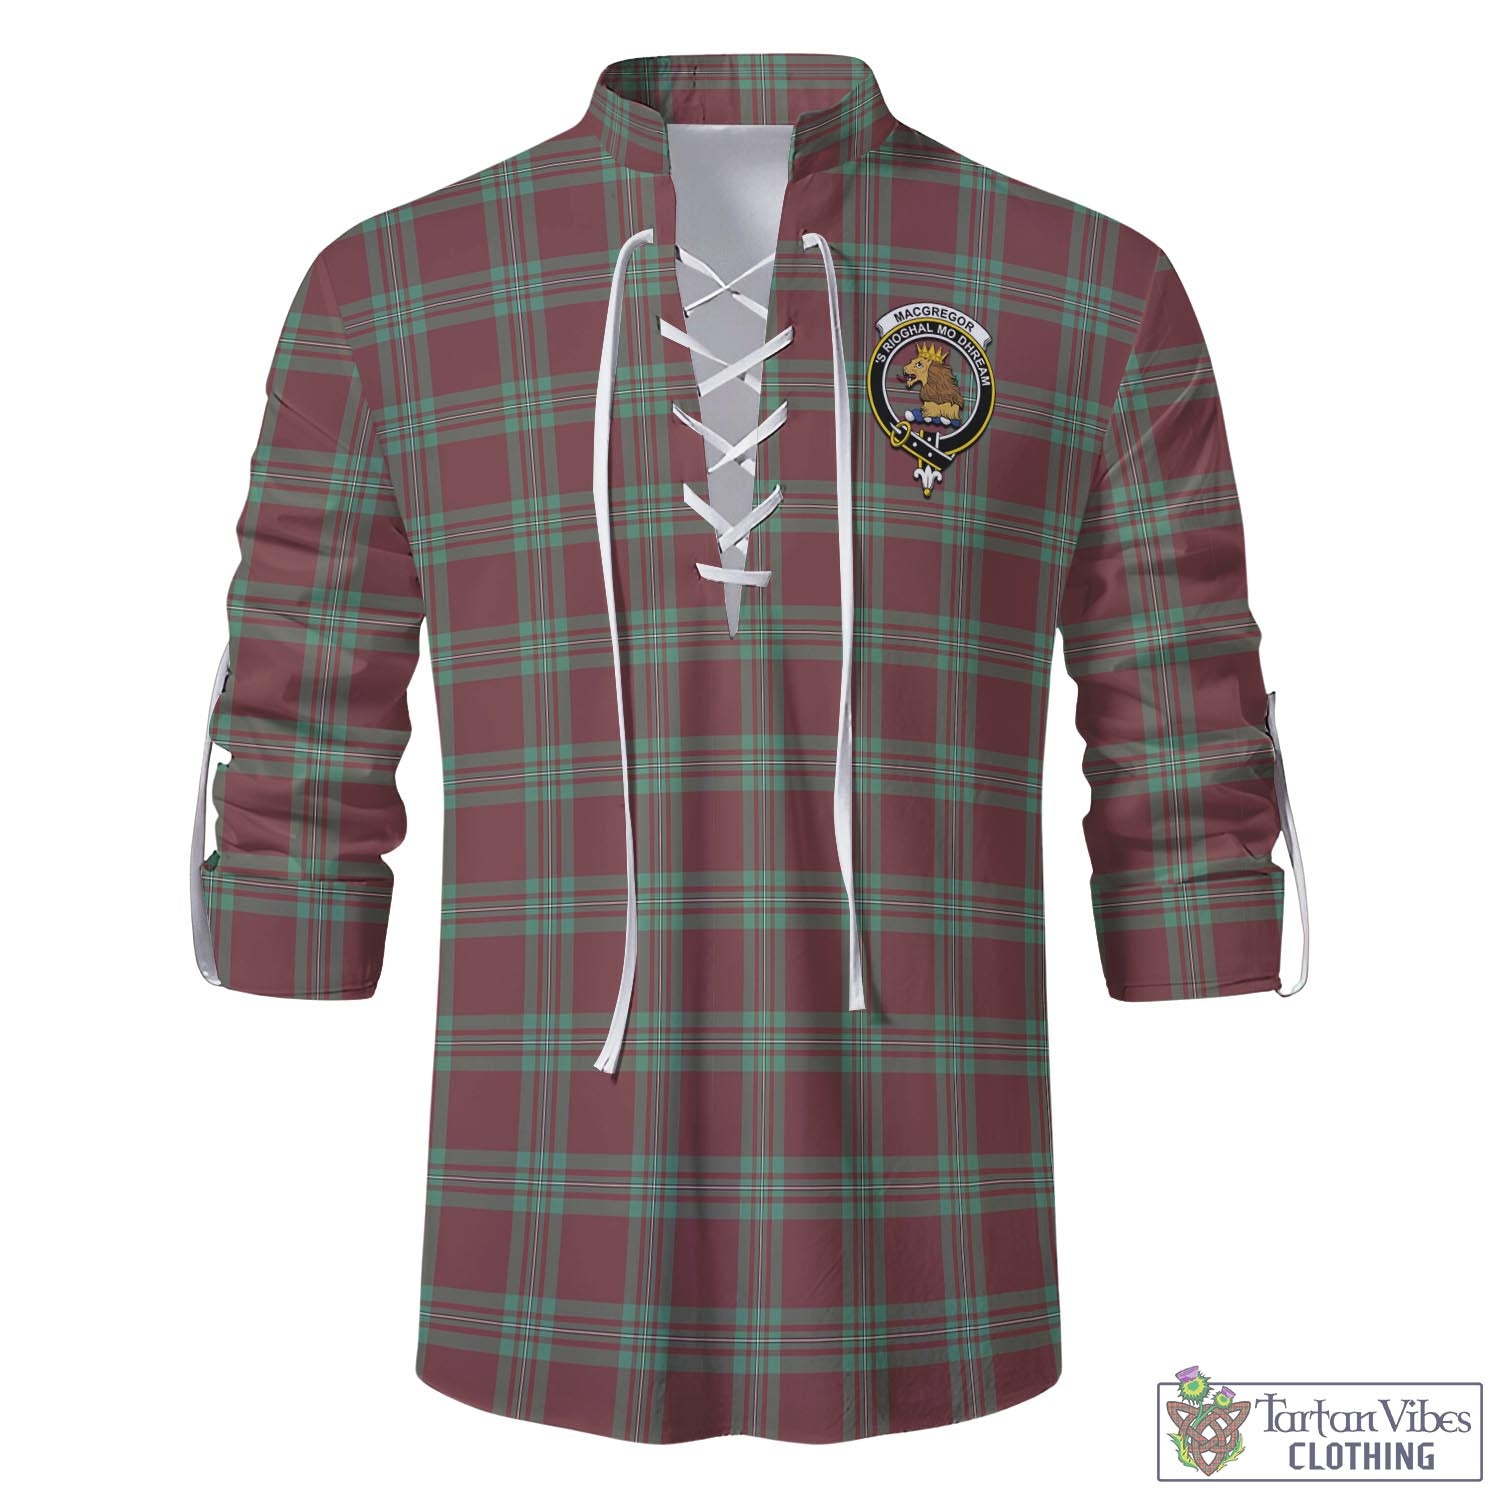 Tartan Vibes Clothing MacGregor Hunting Ancient Tartan Men's Scottish Traditional Jacobite Ghillie Kilt Shirt with Family Crest